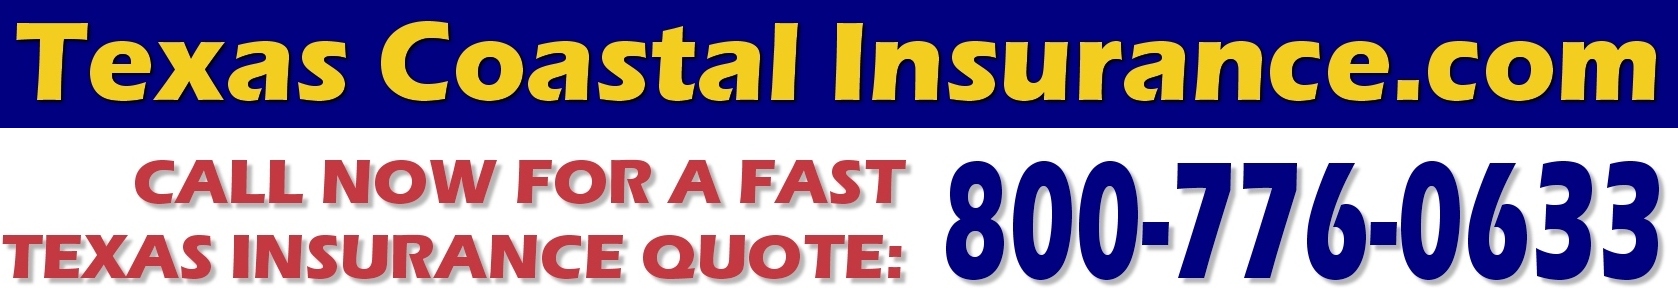 Texas Coastal Insurance Com Affordable Texas Indvidual And Group Health Insurance Quotes Online